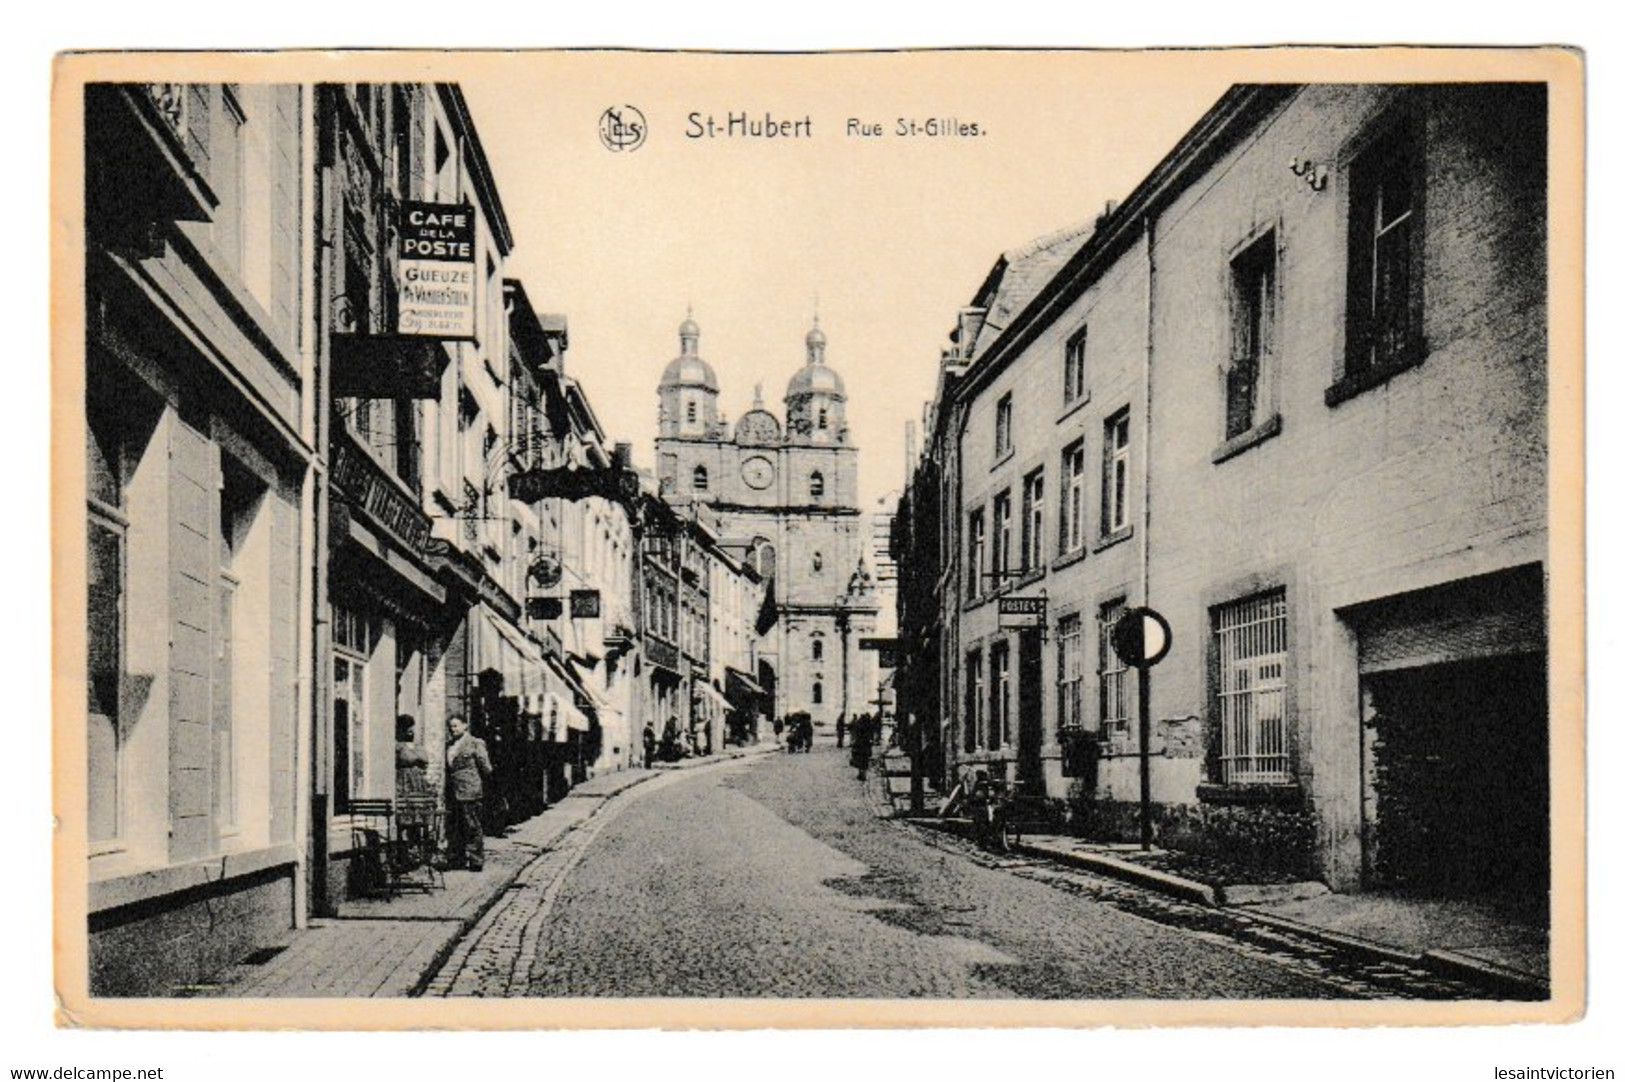 ST HUBERT RUE ST GILLES CATHEDRALE ANIMEE - Neufchateau